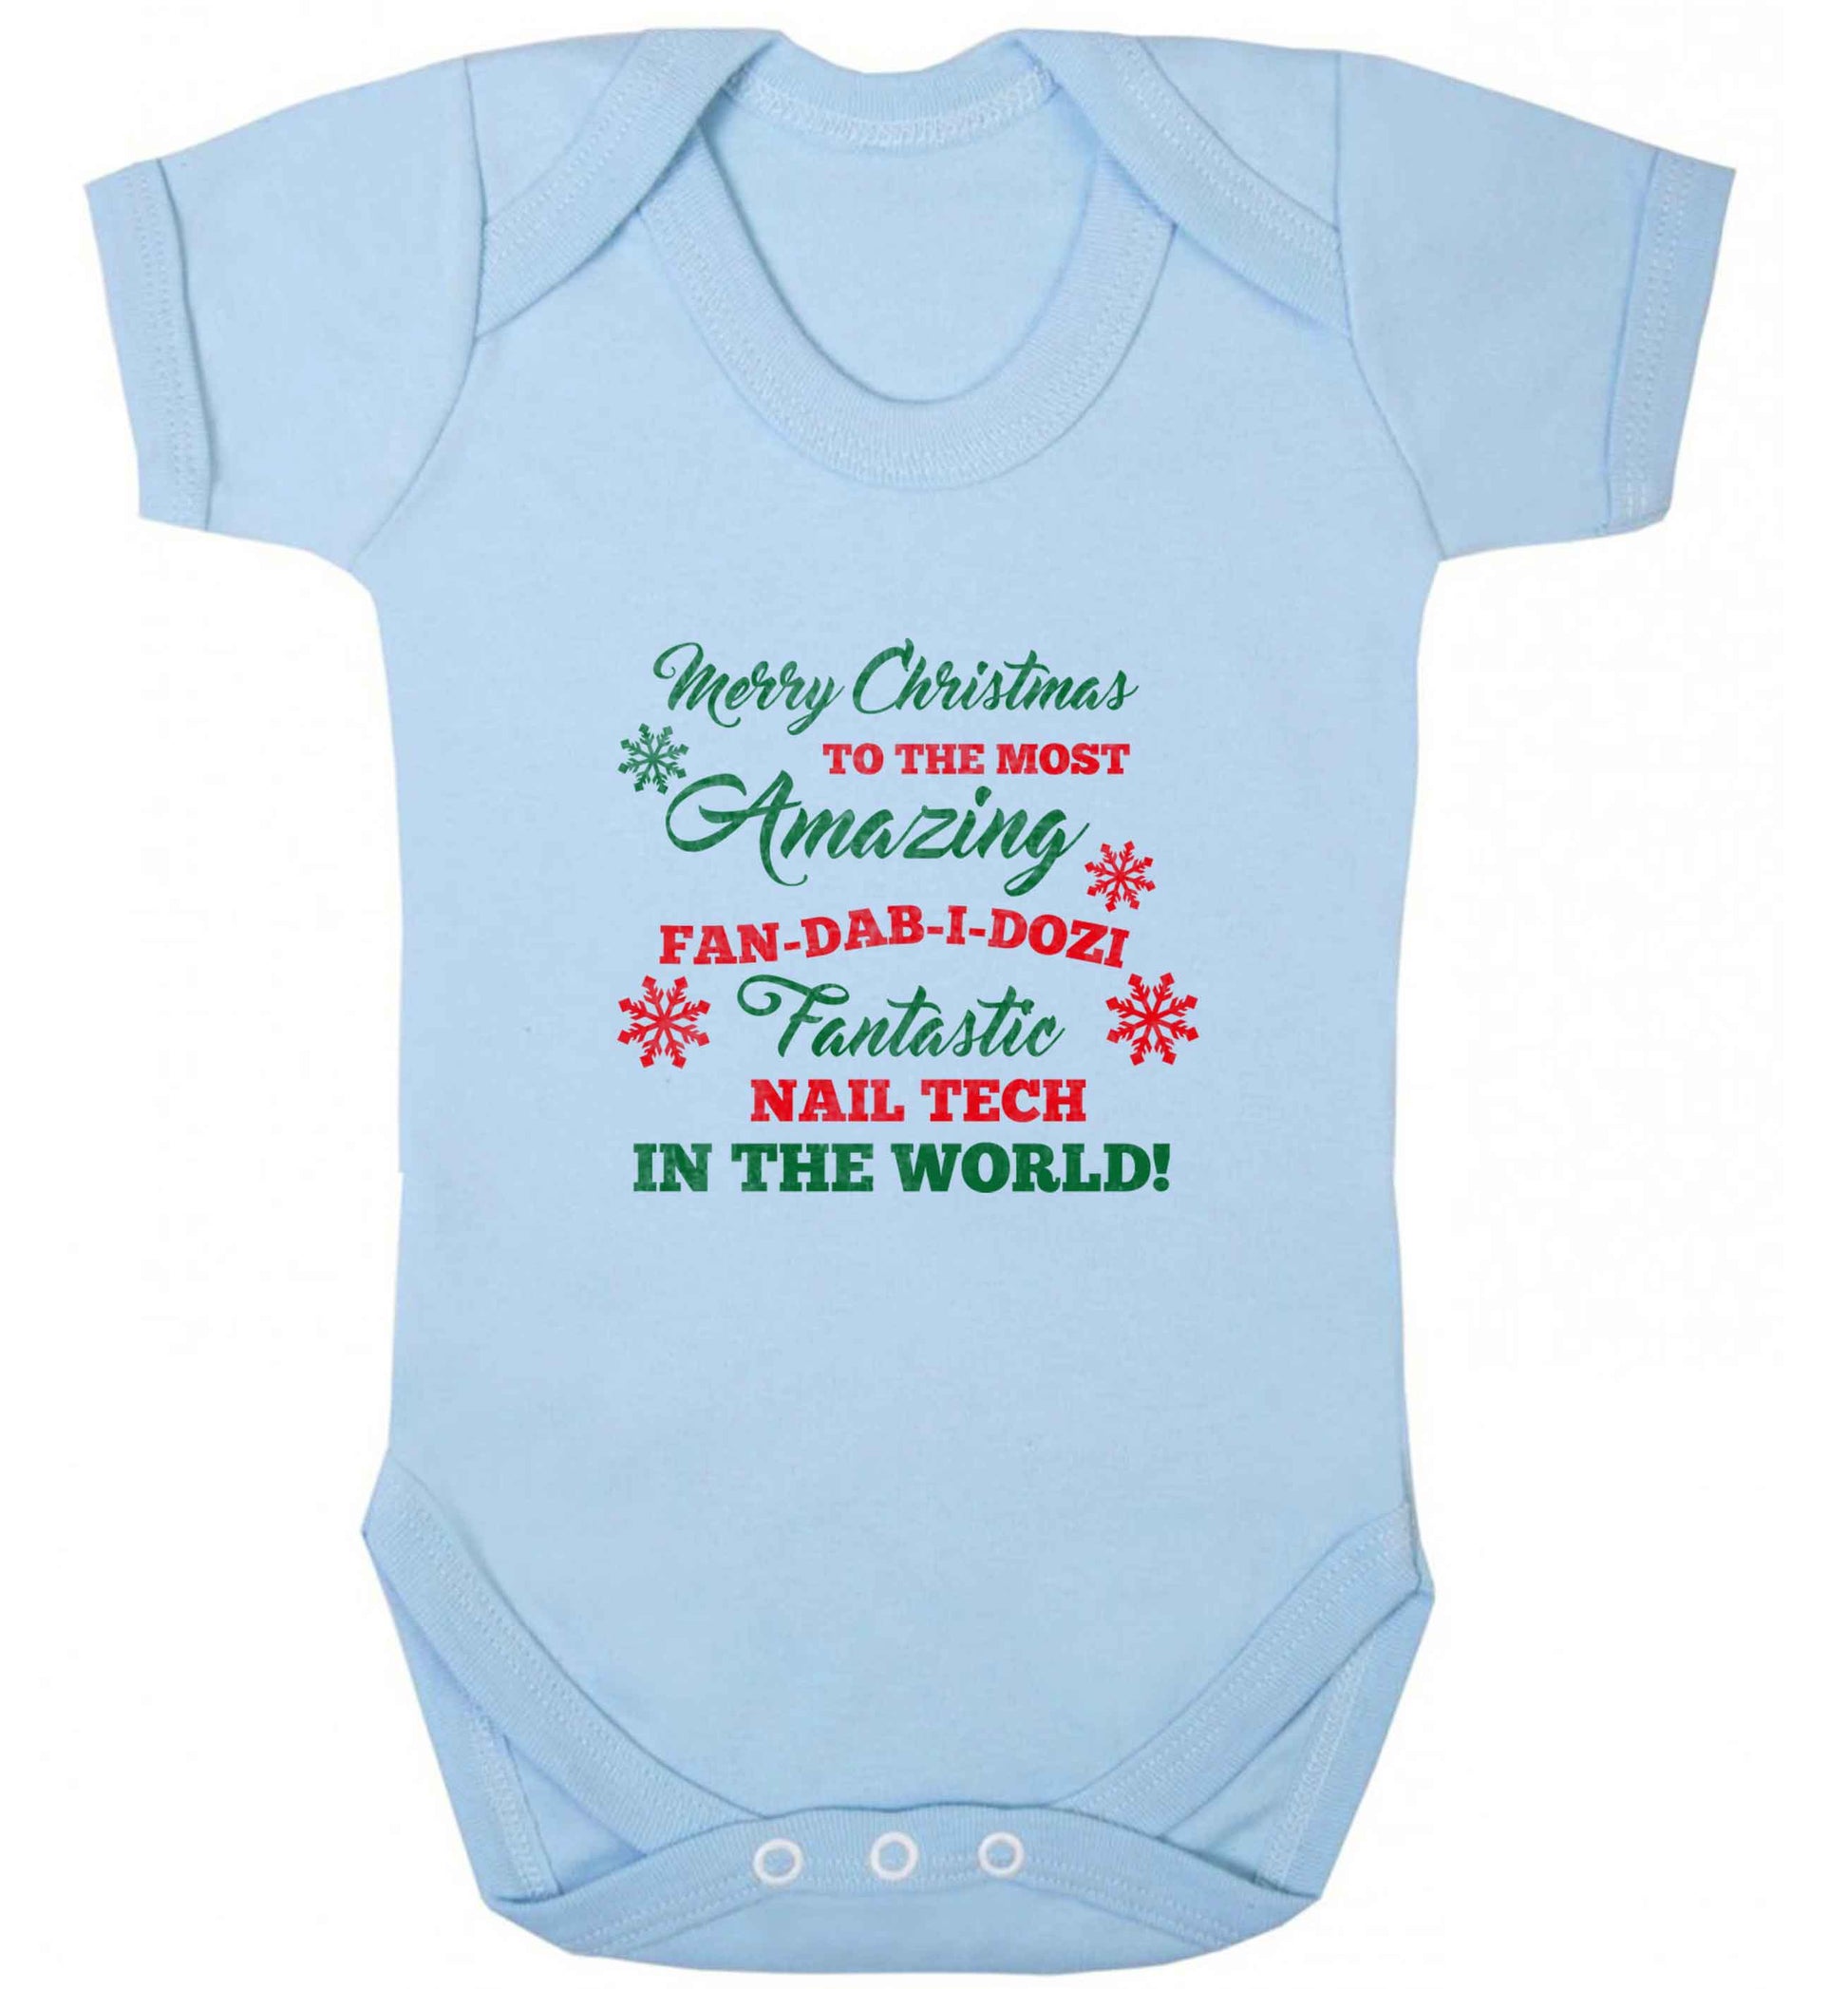 Merry Christmas to the most amazing fan-dab-i-dozi fantasic nail technician in the world baby vest pale blue 18-24 months